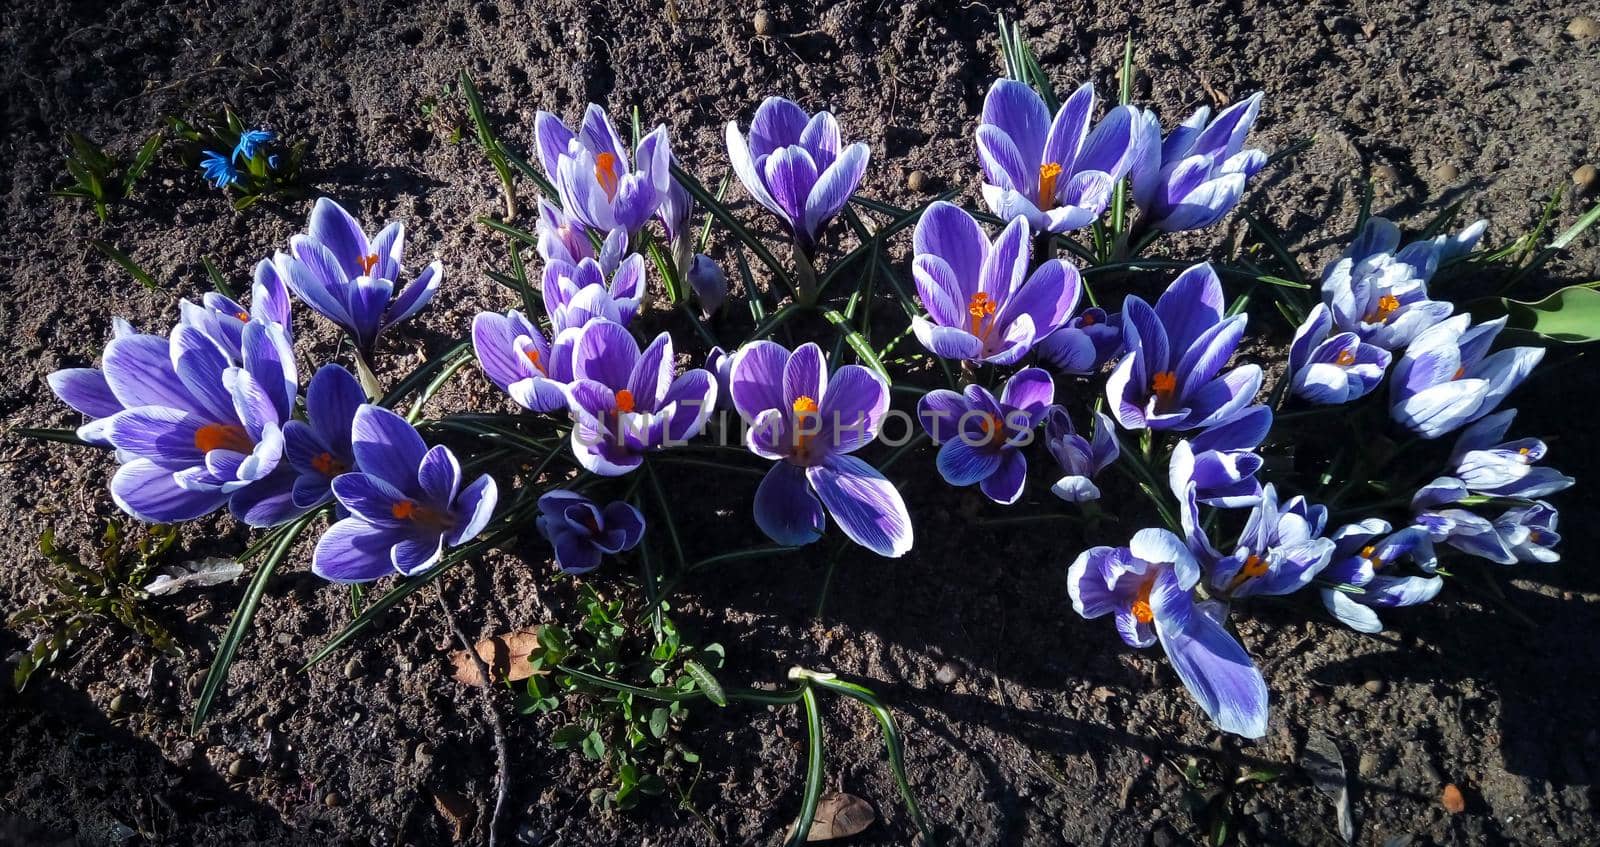 Lilac spring crocuses in the park on a flower bed. The first spring flowers by lapushka62